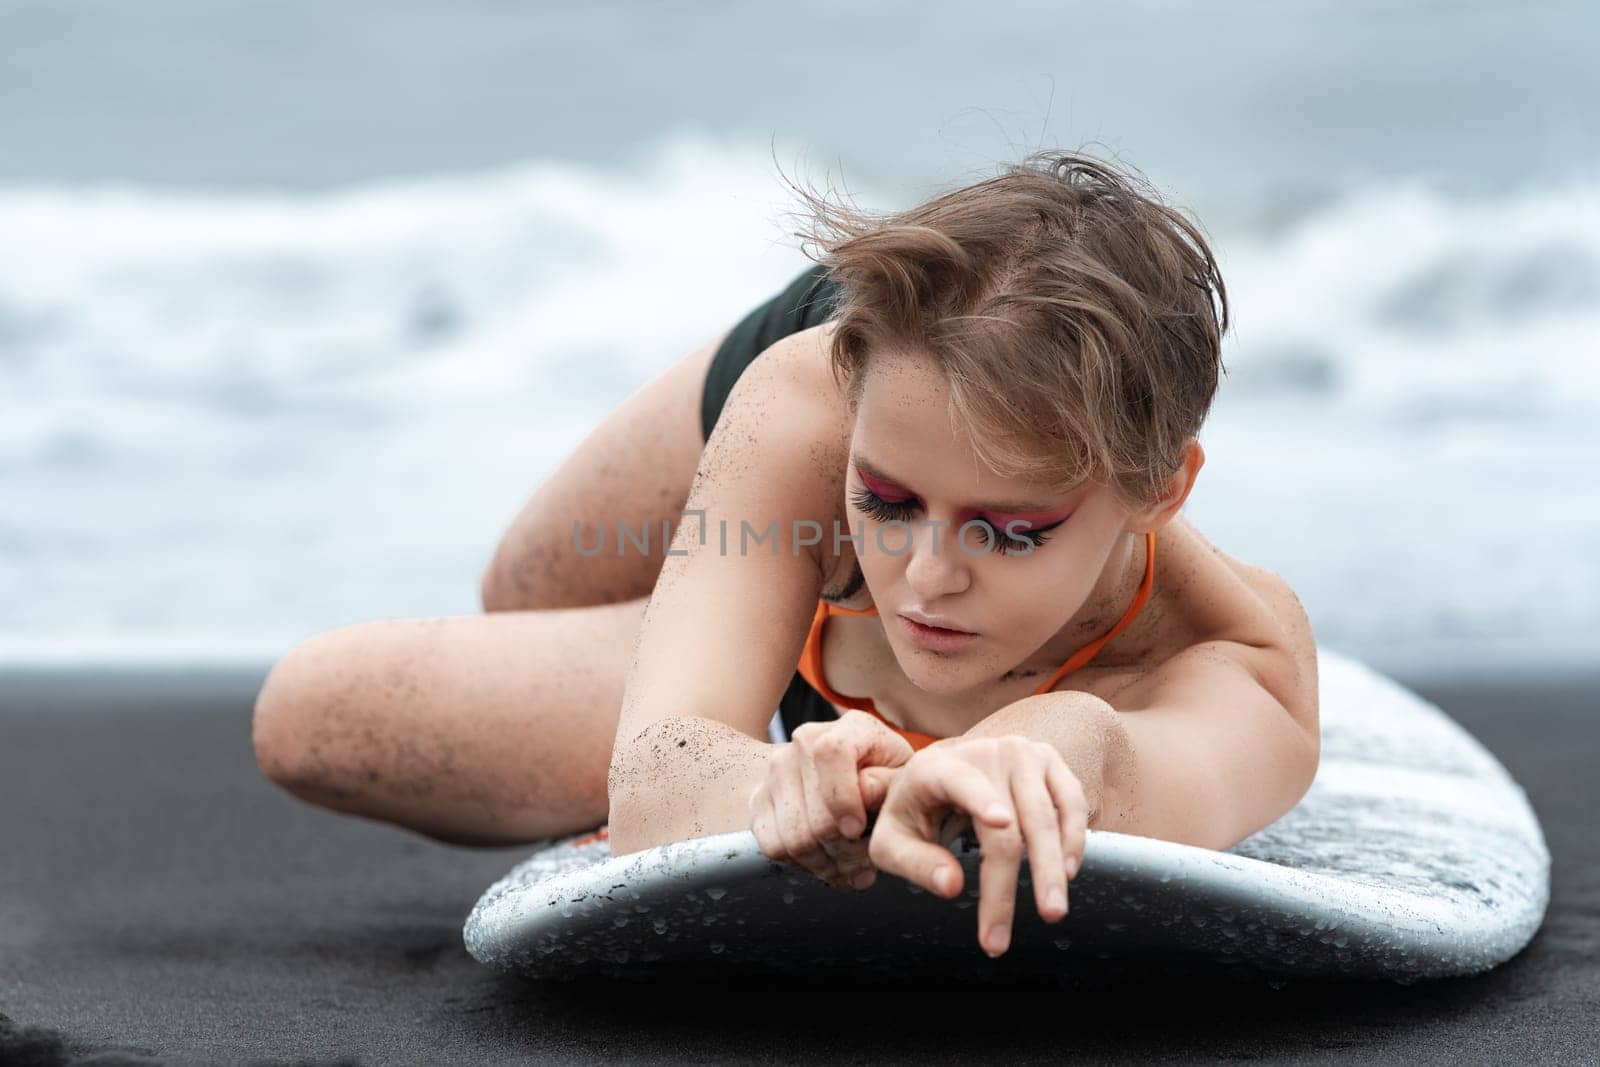 Close-up view of woman surfer lying on surfboard with eyes closed, looks so relaxed and peaceful. Amazing blonde sports fashion model with bright makeup enjoying moment during summer beach holiday